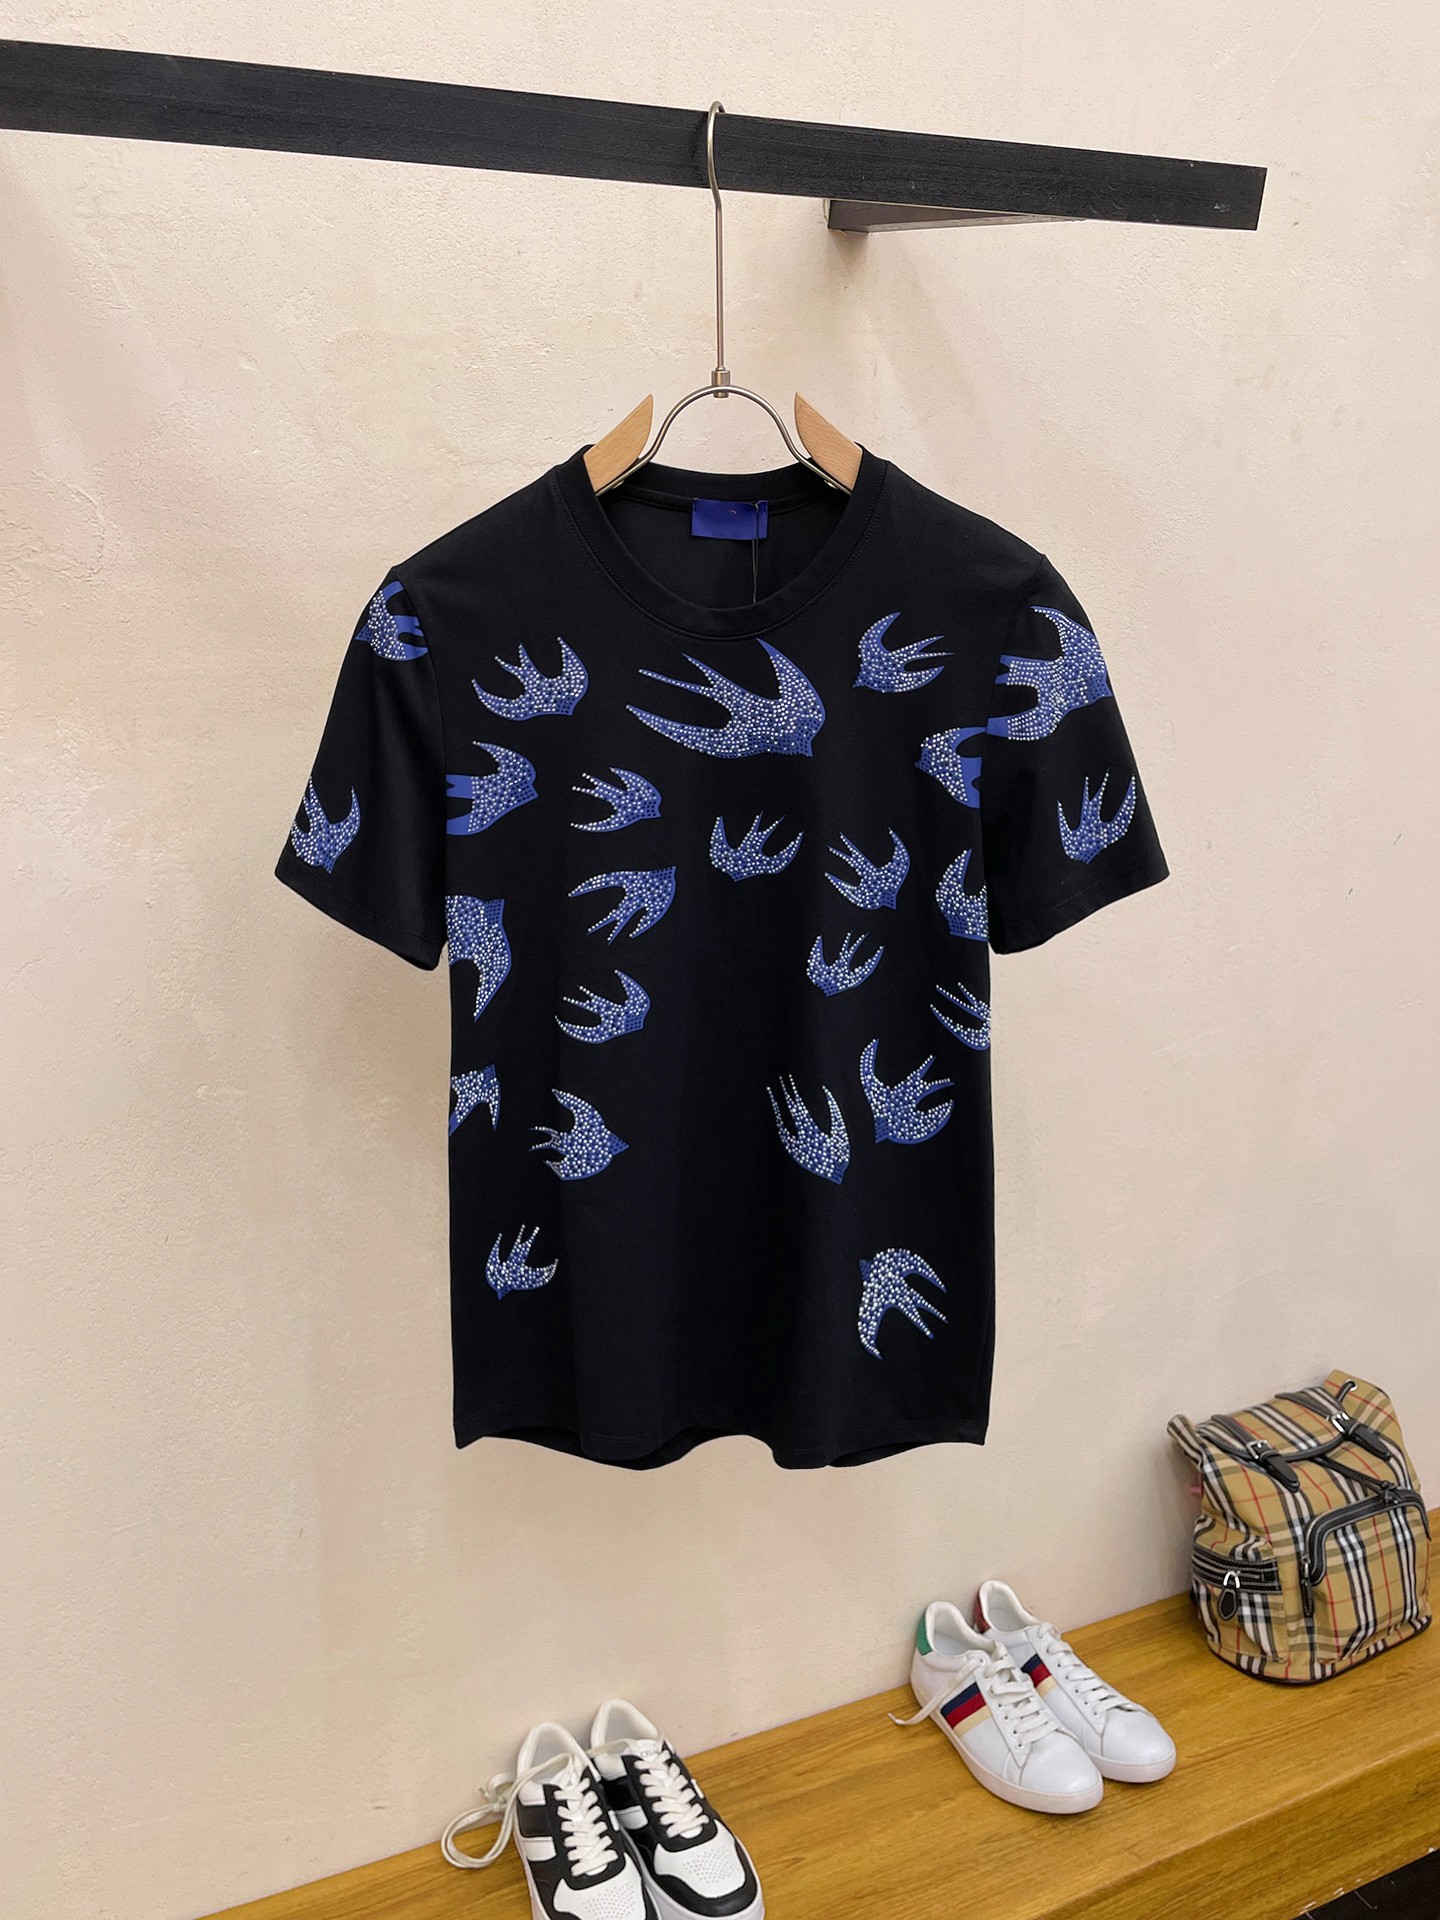 Where should I buy to receive
 Armani Good
 Clothing T-Shirt Men Cotton Mercerized Spring/Summer Collection Fashion Short Sleeve